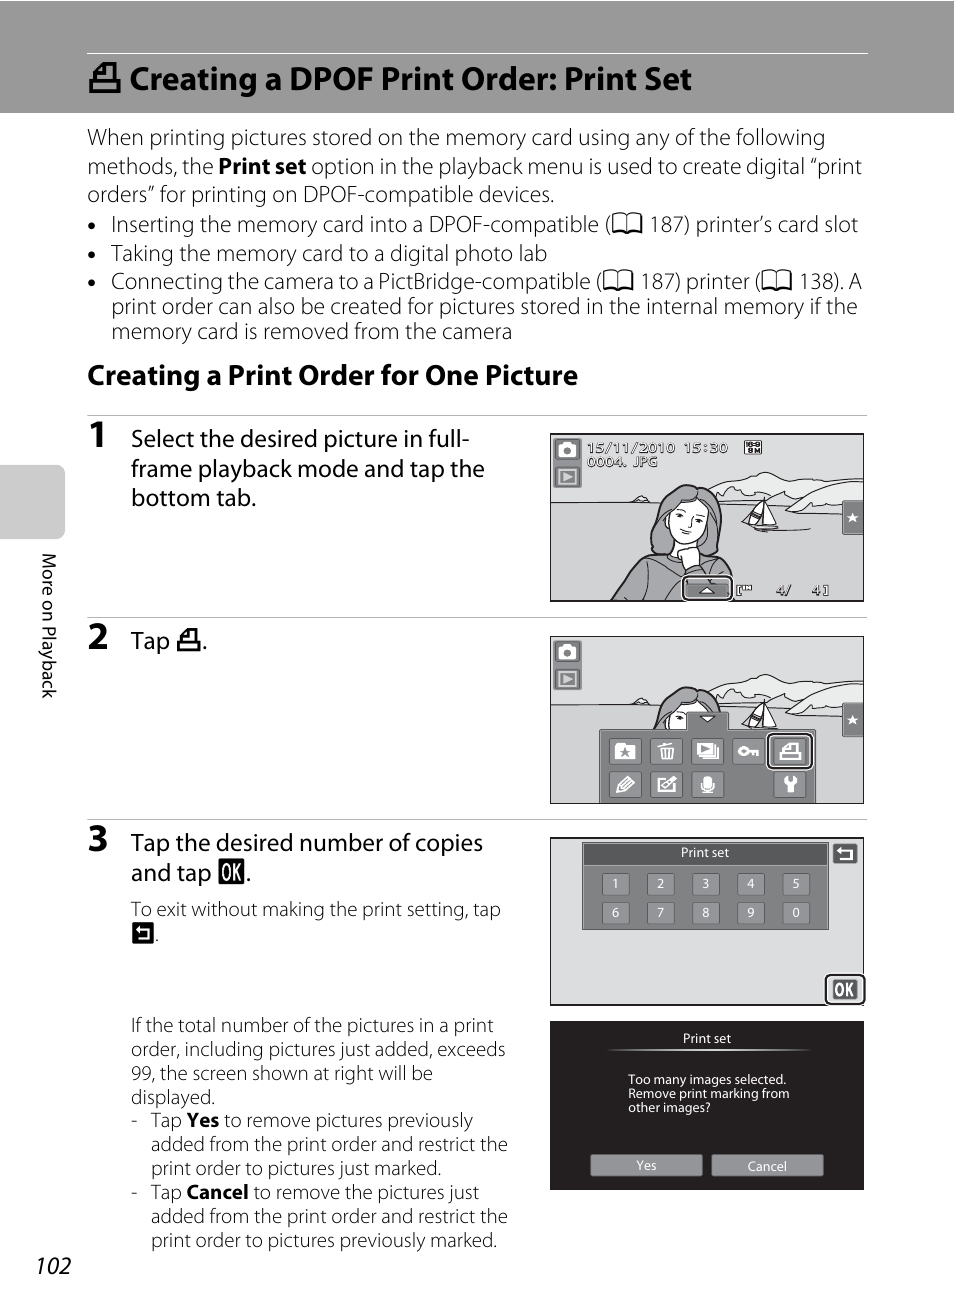 Creating a dpof print order: print set, Creating a print order for one picture, A creating a dpof print order: print set | Tap a, Tap the desired number of copies and tap i | Nortel Networks COOLPIX S80 User Manual | Page 114 / 204